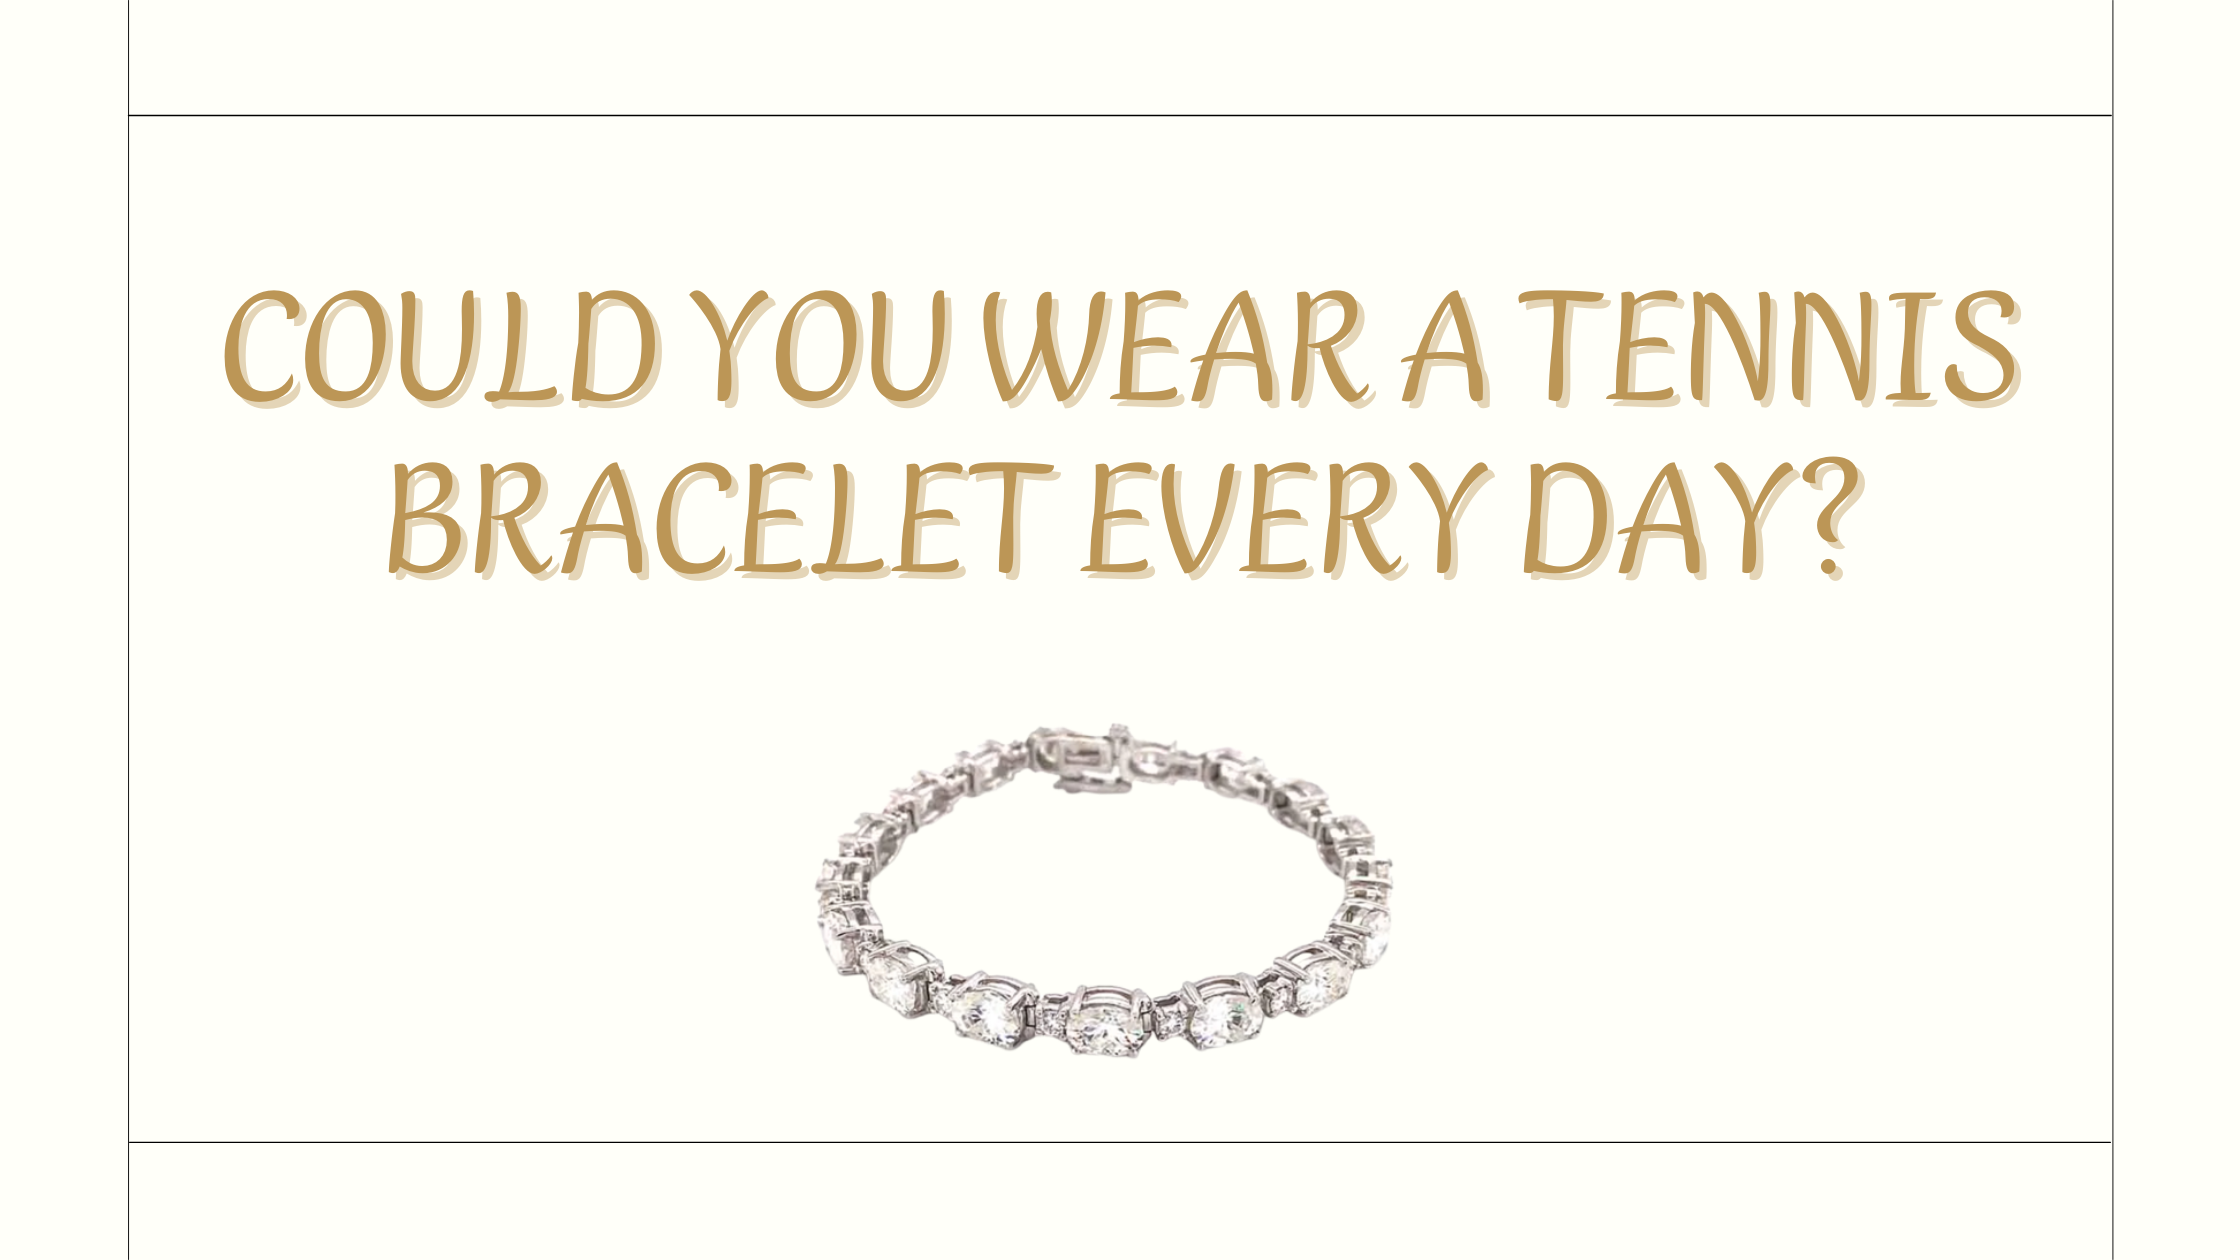 Could You Wear a Tennis Bracelet Every Day?